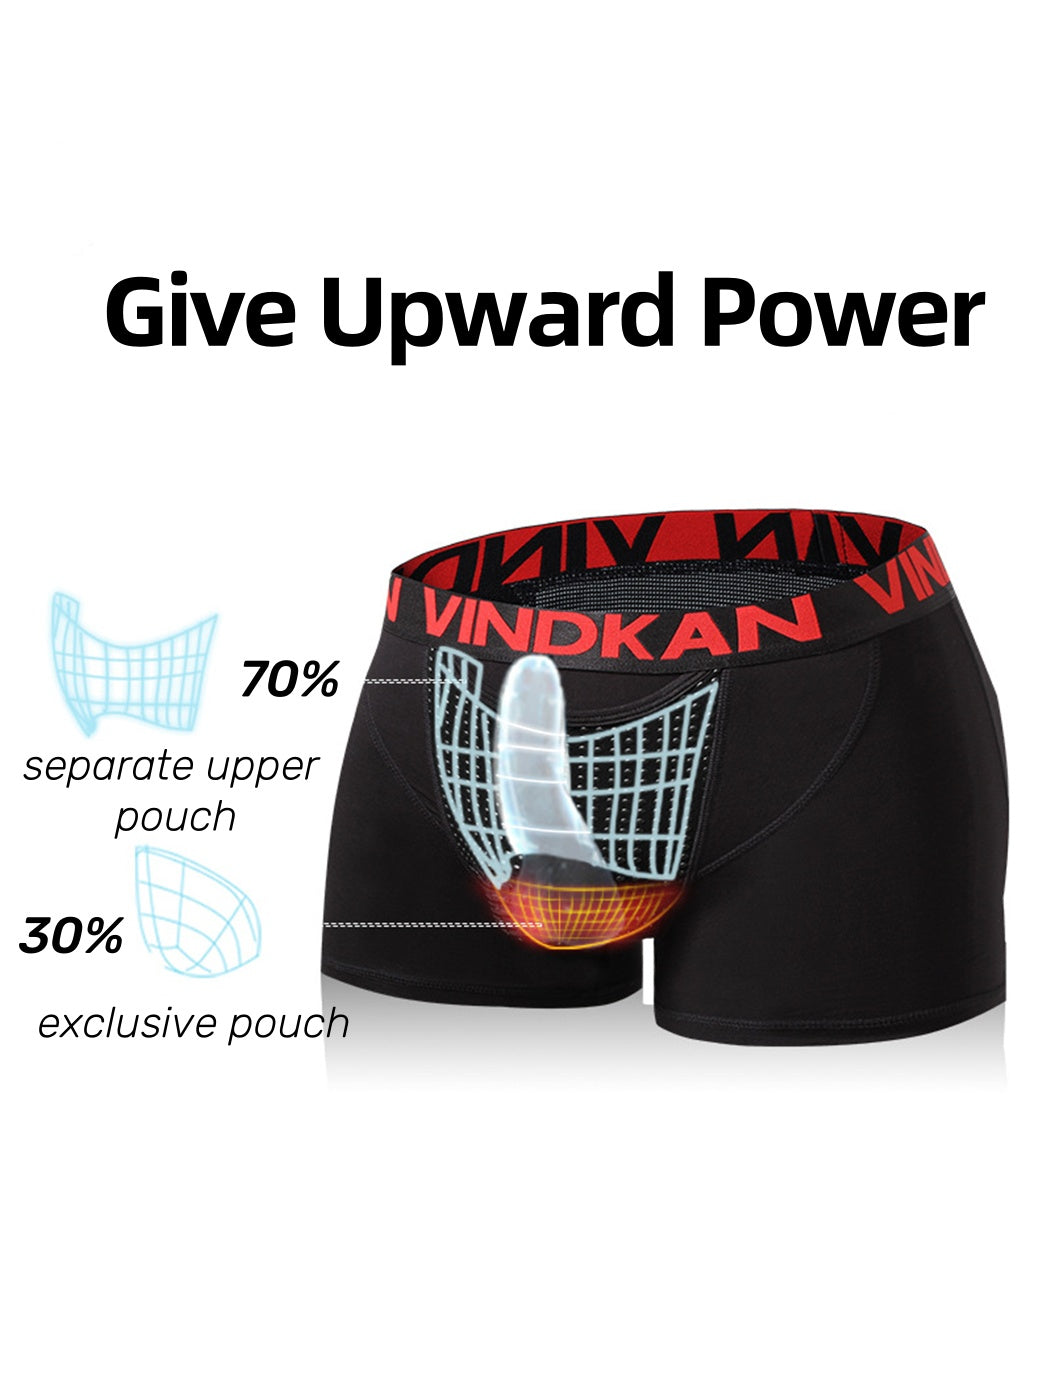 Men's Separated Pouch Magnetic Energy Health Underwear